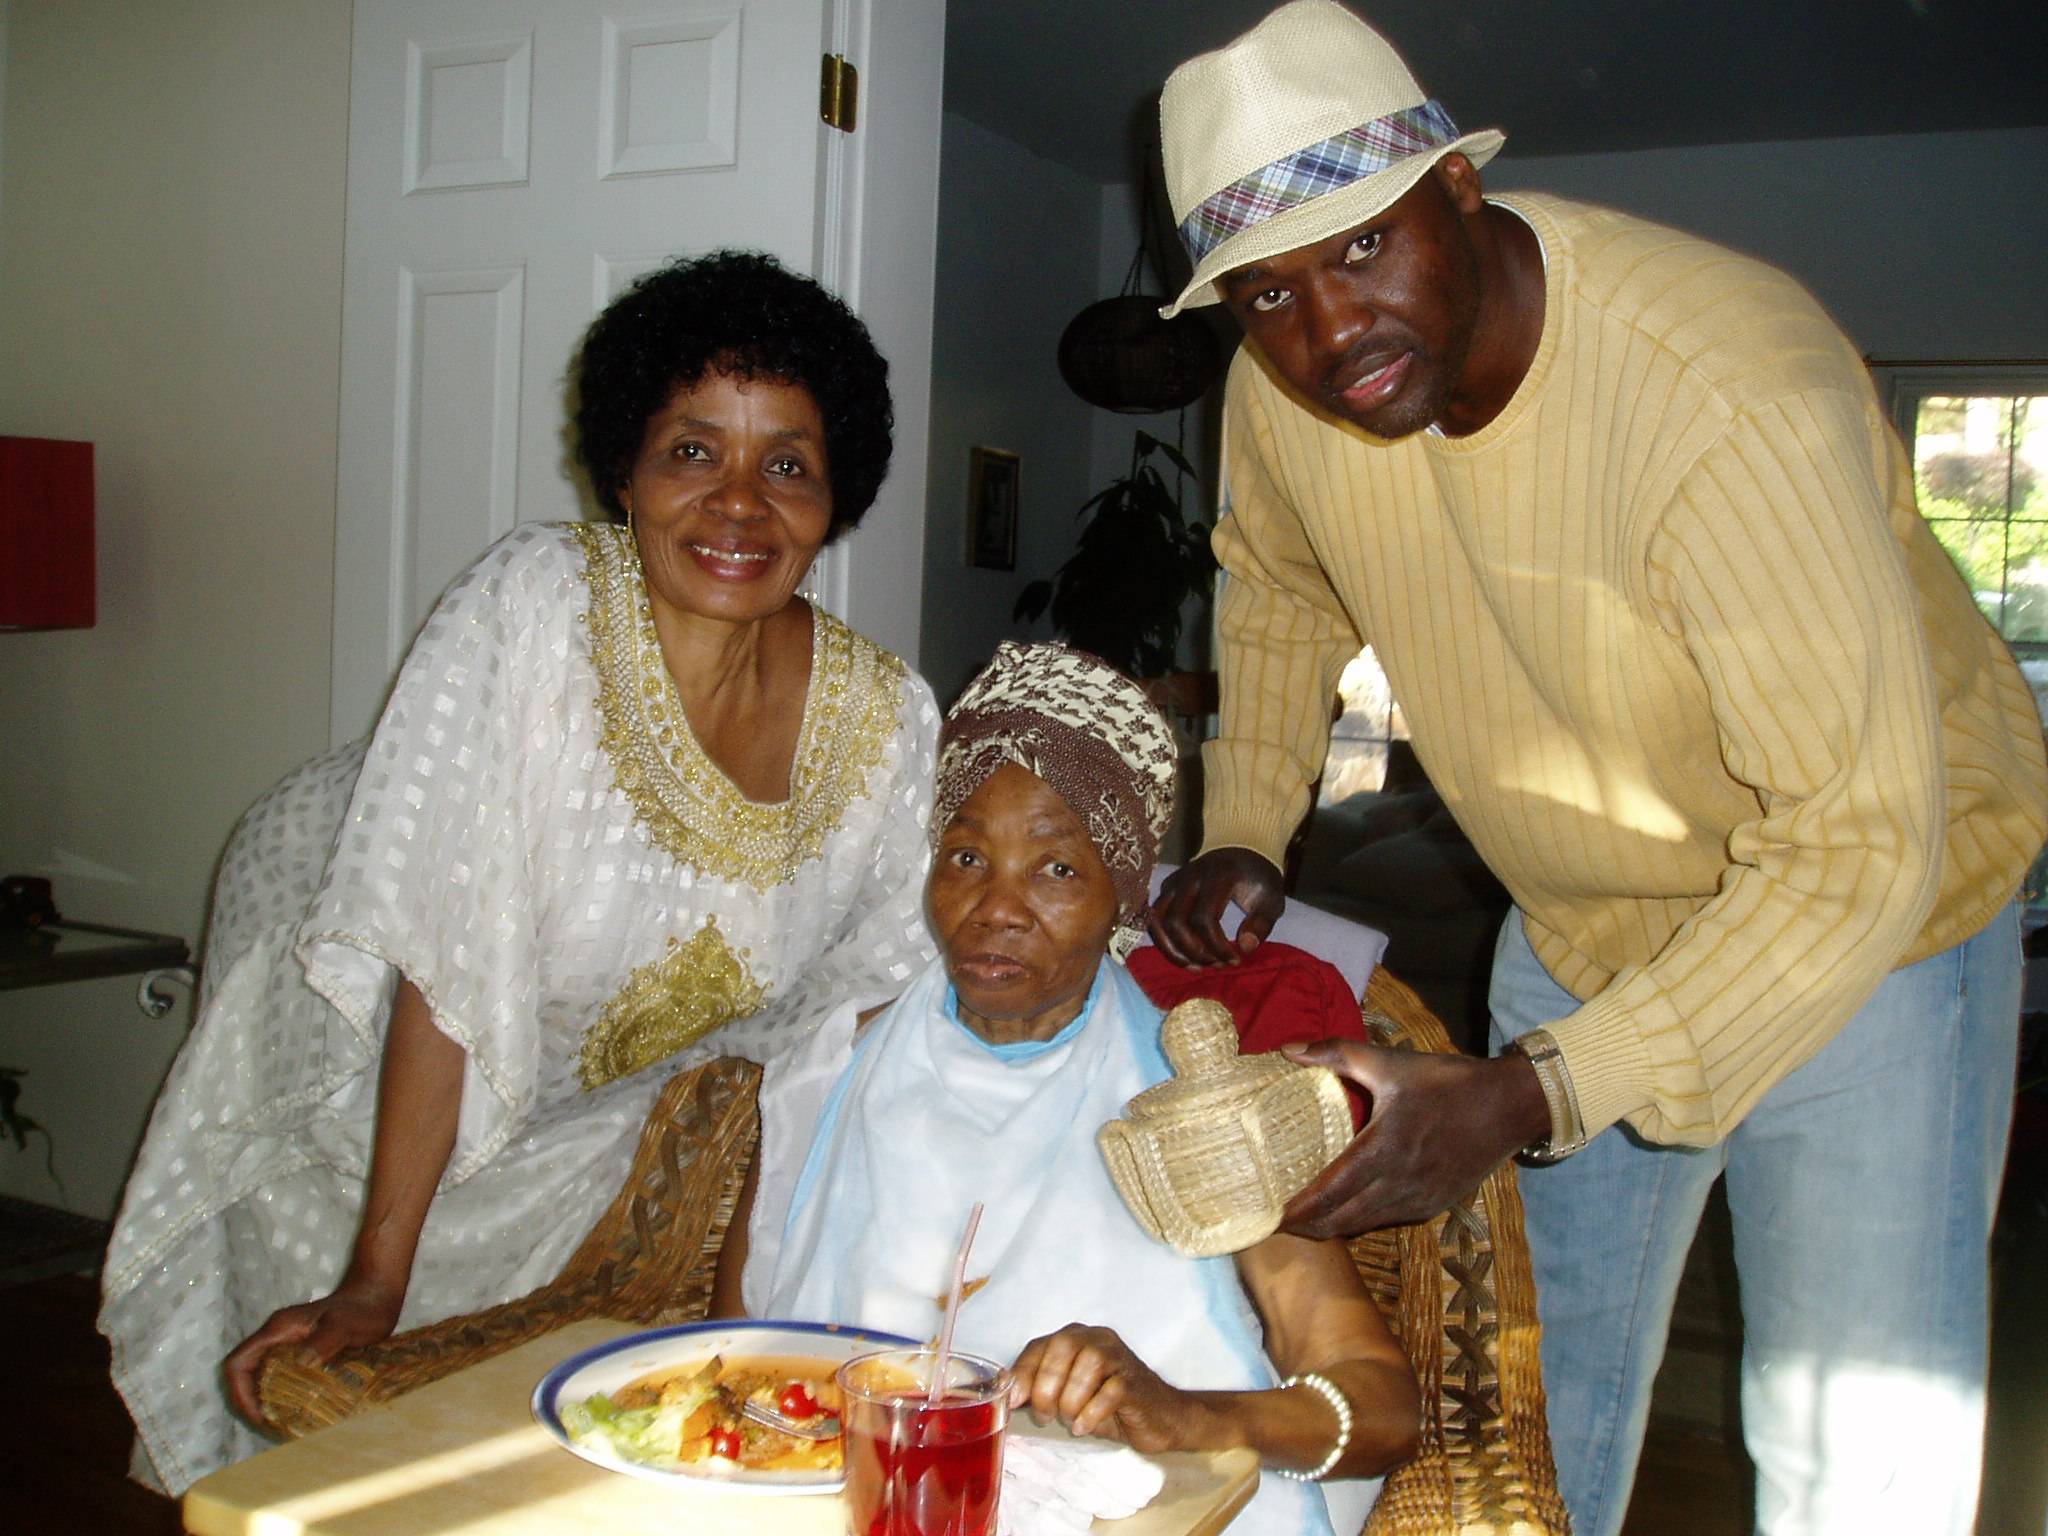   On July 4, 2009, I give my aunt, Phoebe, a birthday gift as her sister -- my mom -- smiles approvingly. The get-together occurs at North White Plains, New York, where Auntie Phoebe lives with her daughter, Dr. Kafui Demasio.  